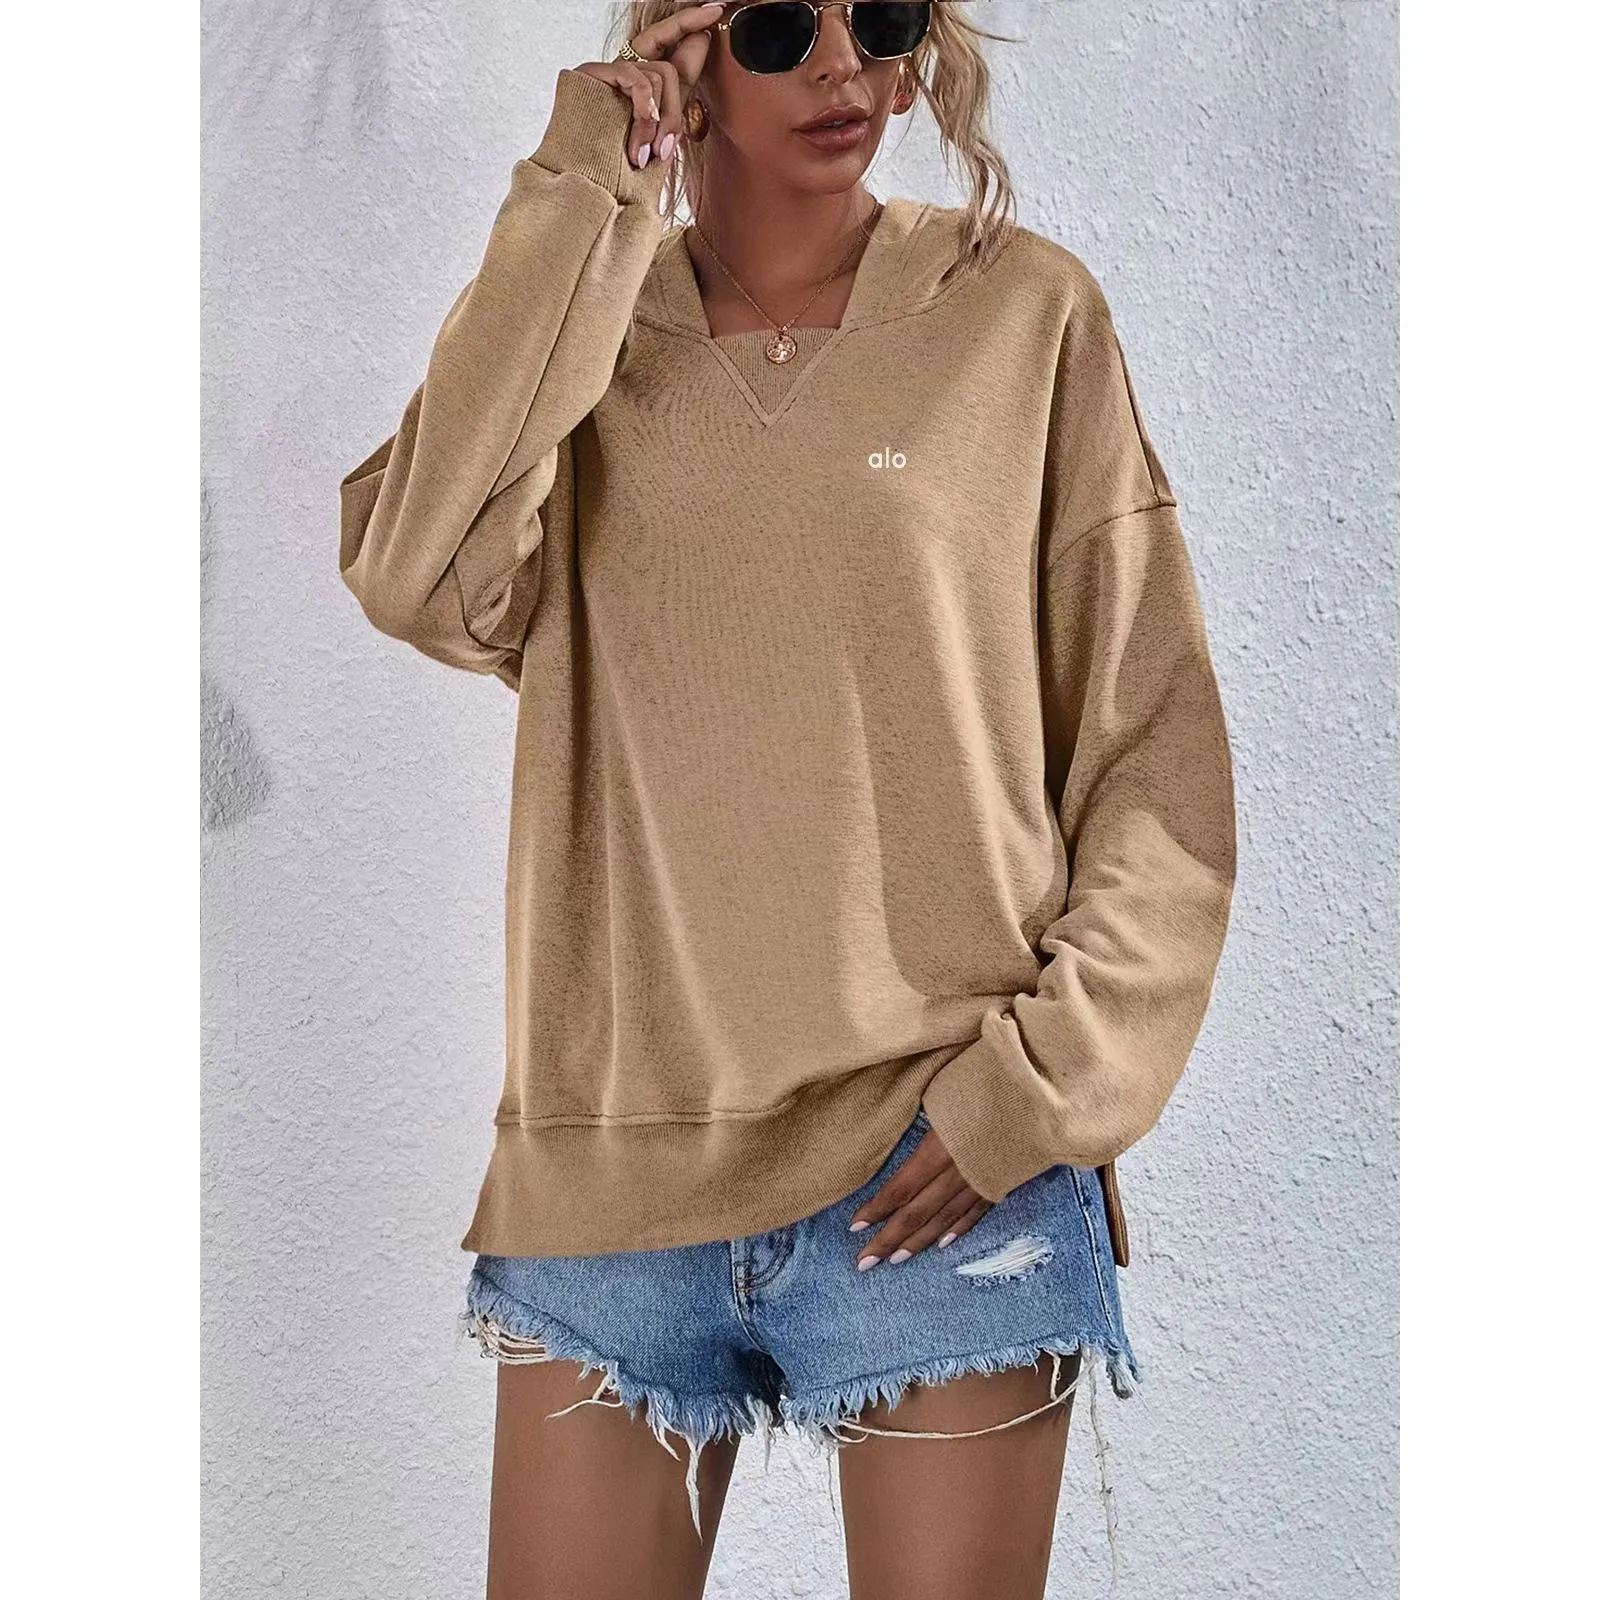 aloyogaHooded sports casual blouse European and n women's long-sleeved sweater men and women's yoga jacket designer style sweater